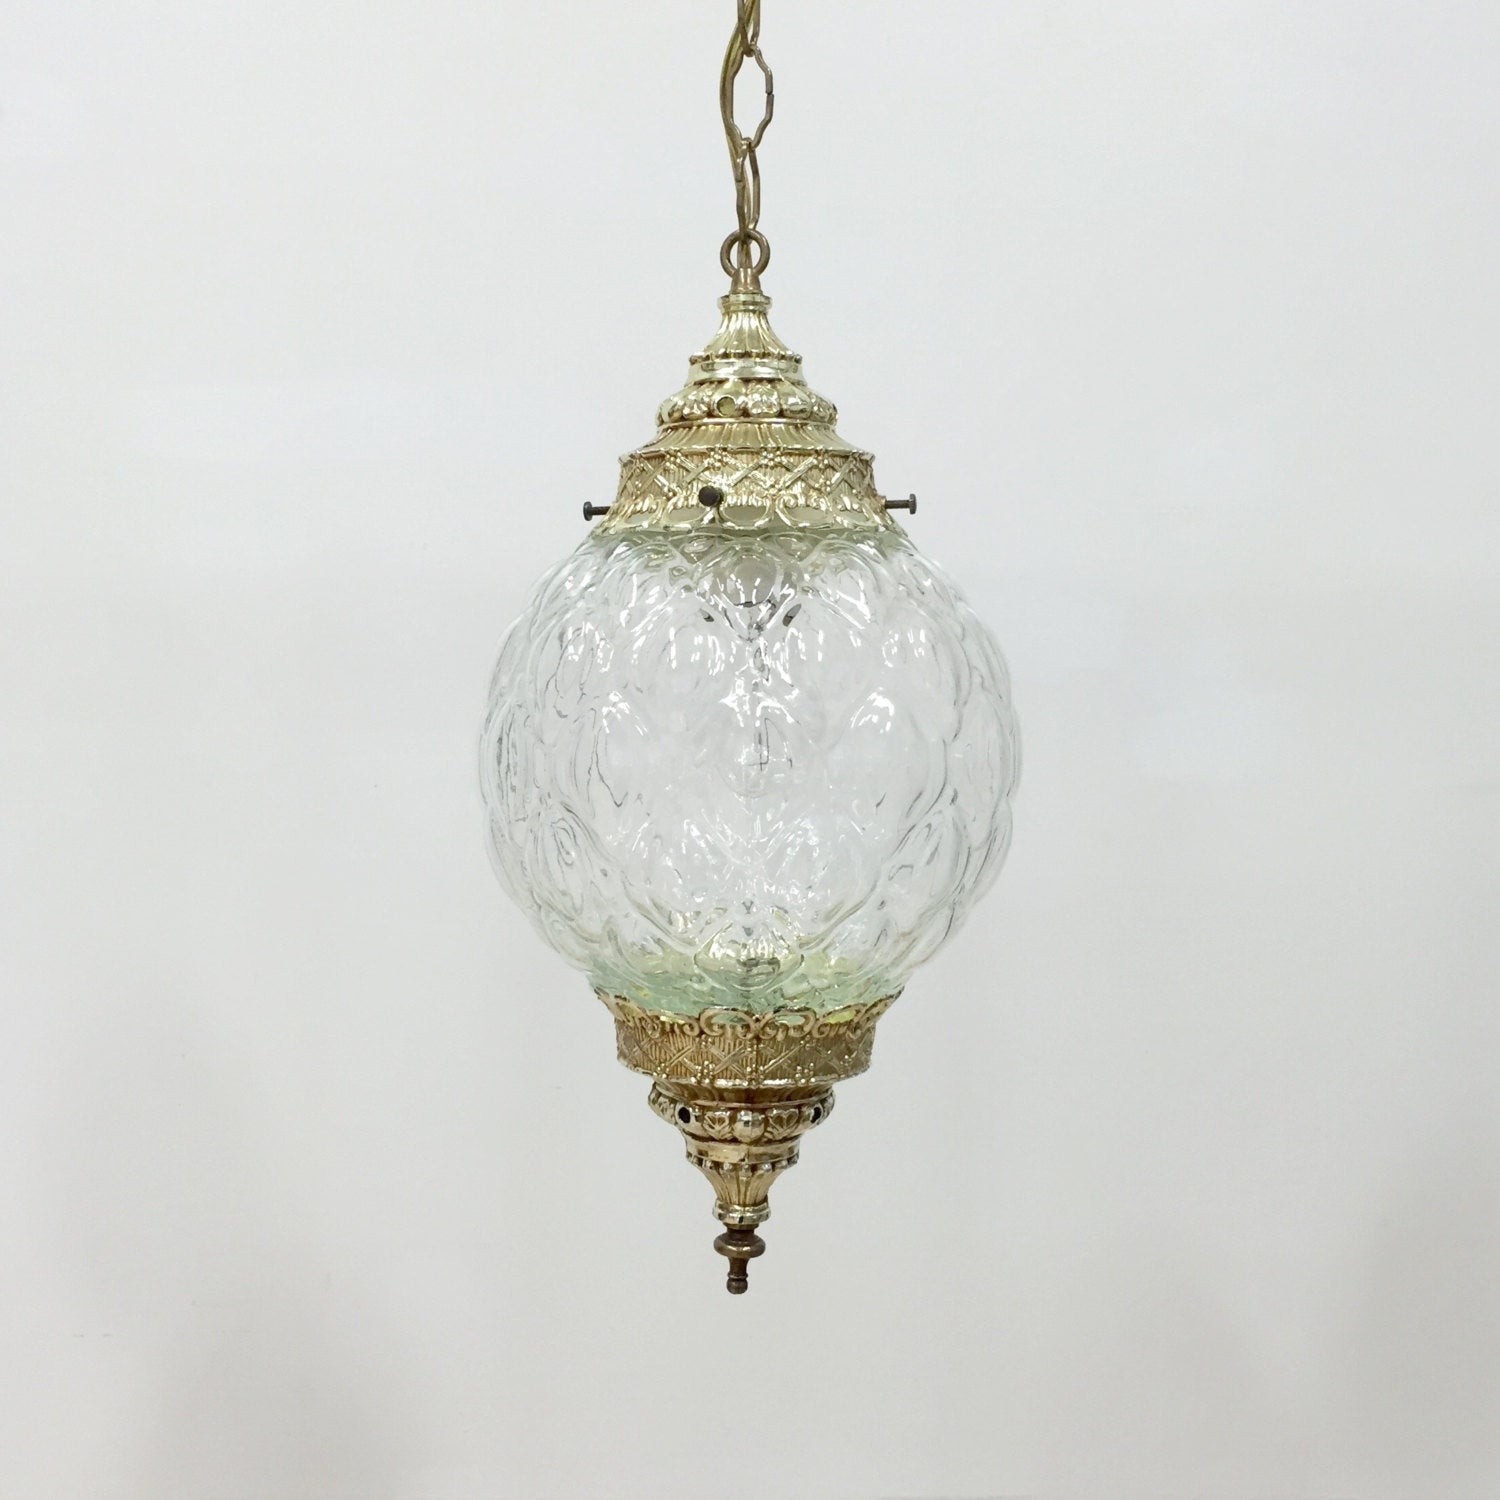 Vintage swag lamp pendant light plug in clear pressed glass